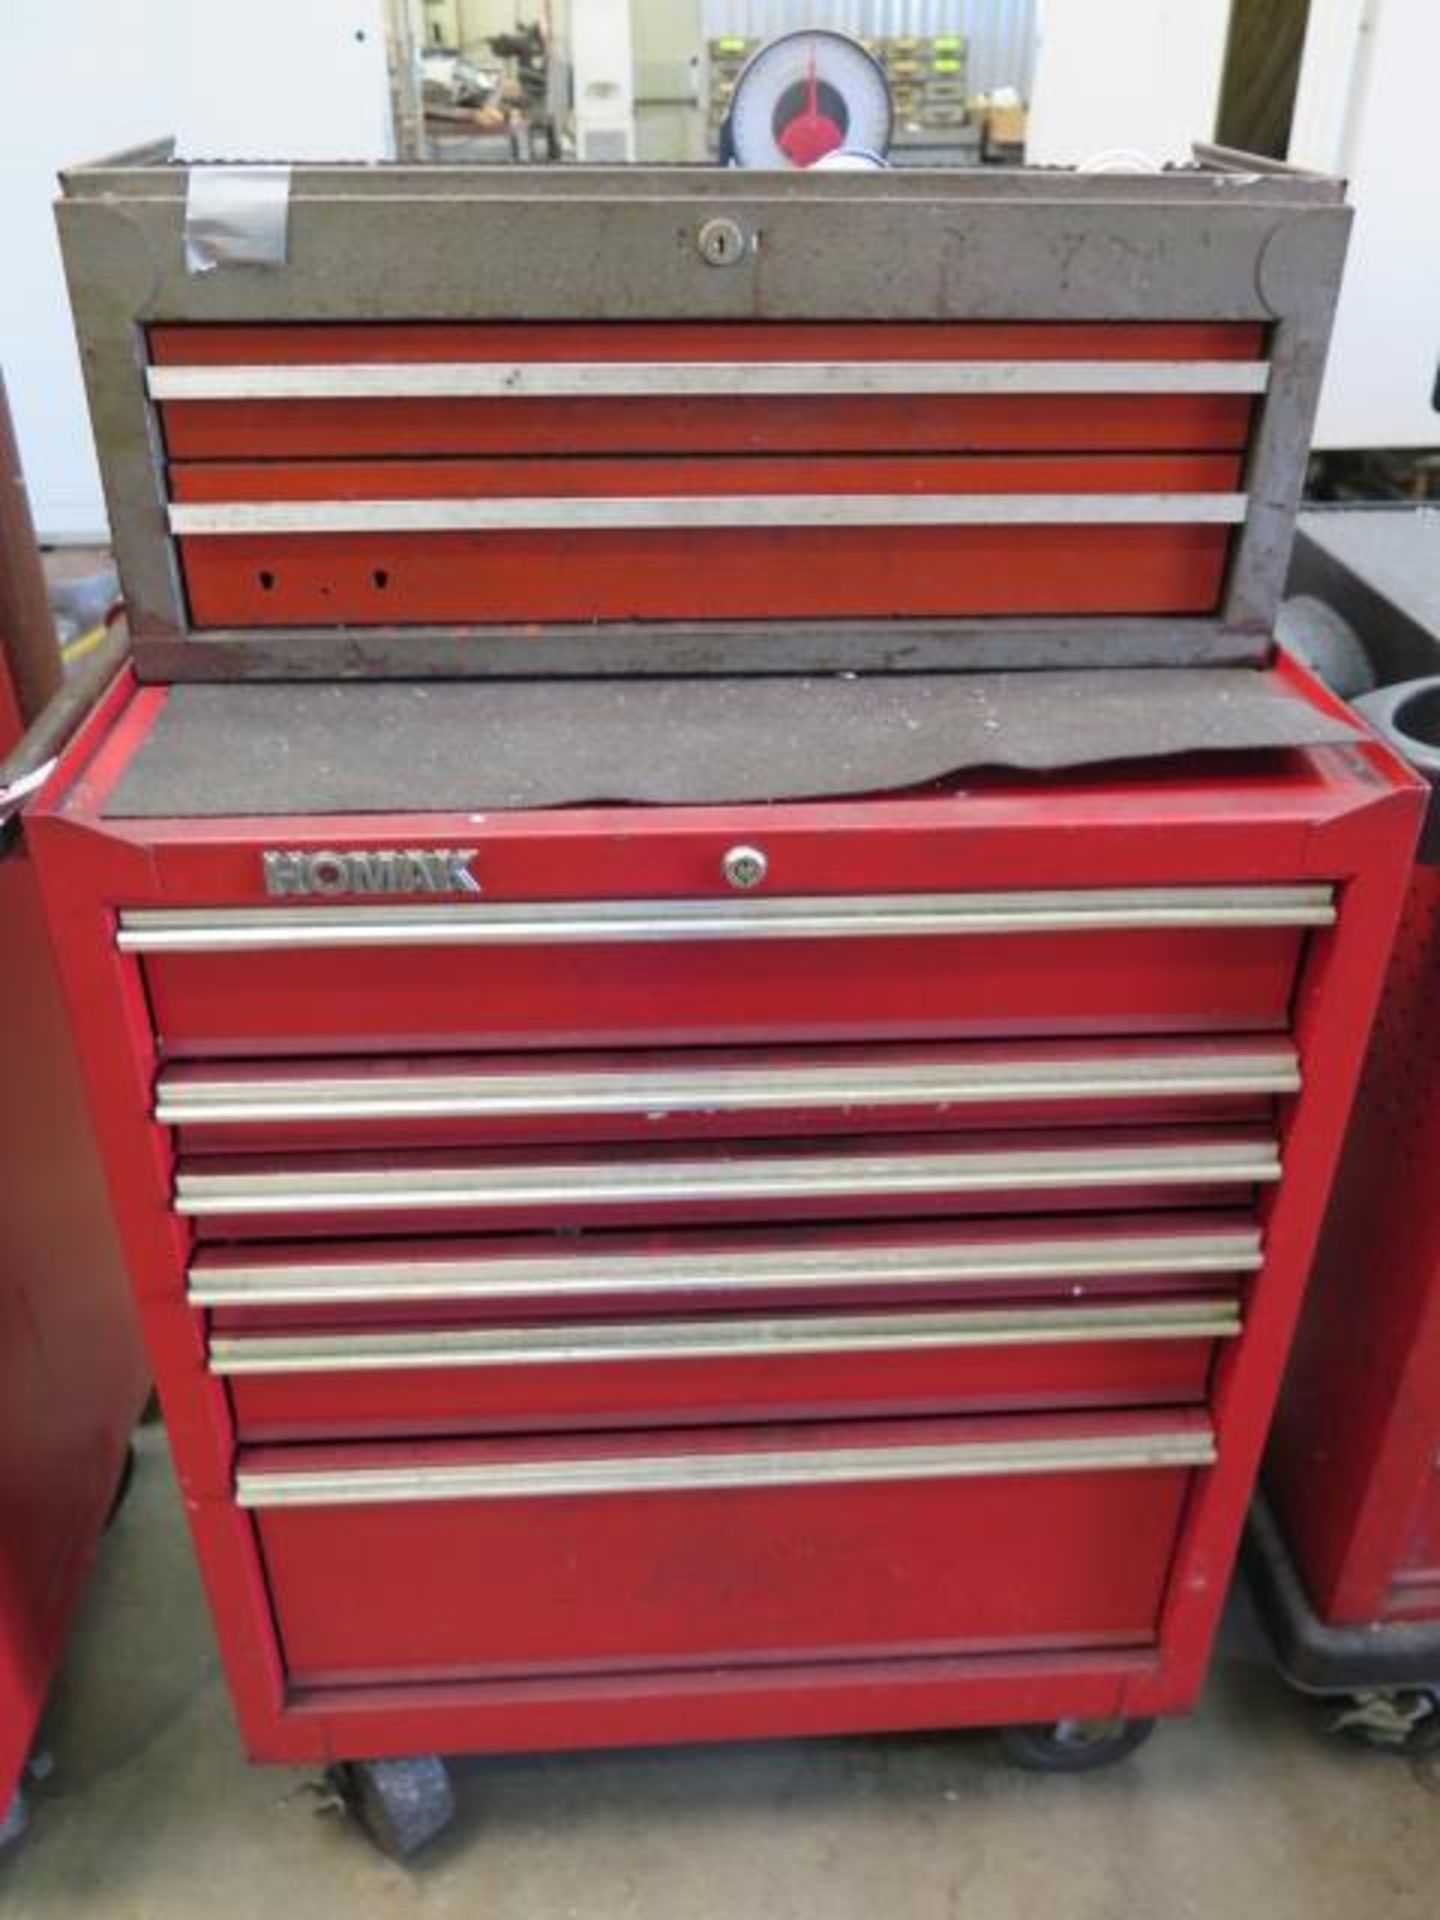 Homac Roll-A-Way Tool Box (SOLD AS-IS - NO WARRANTY)